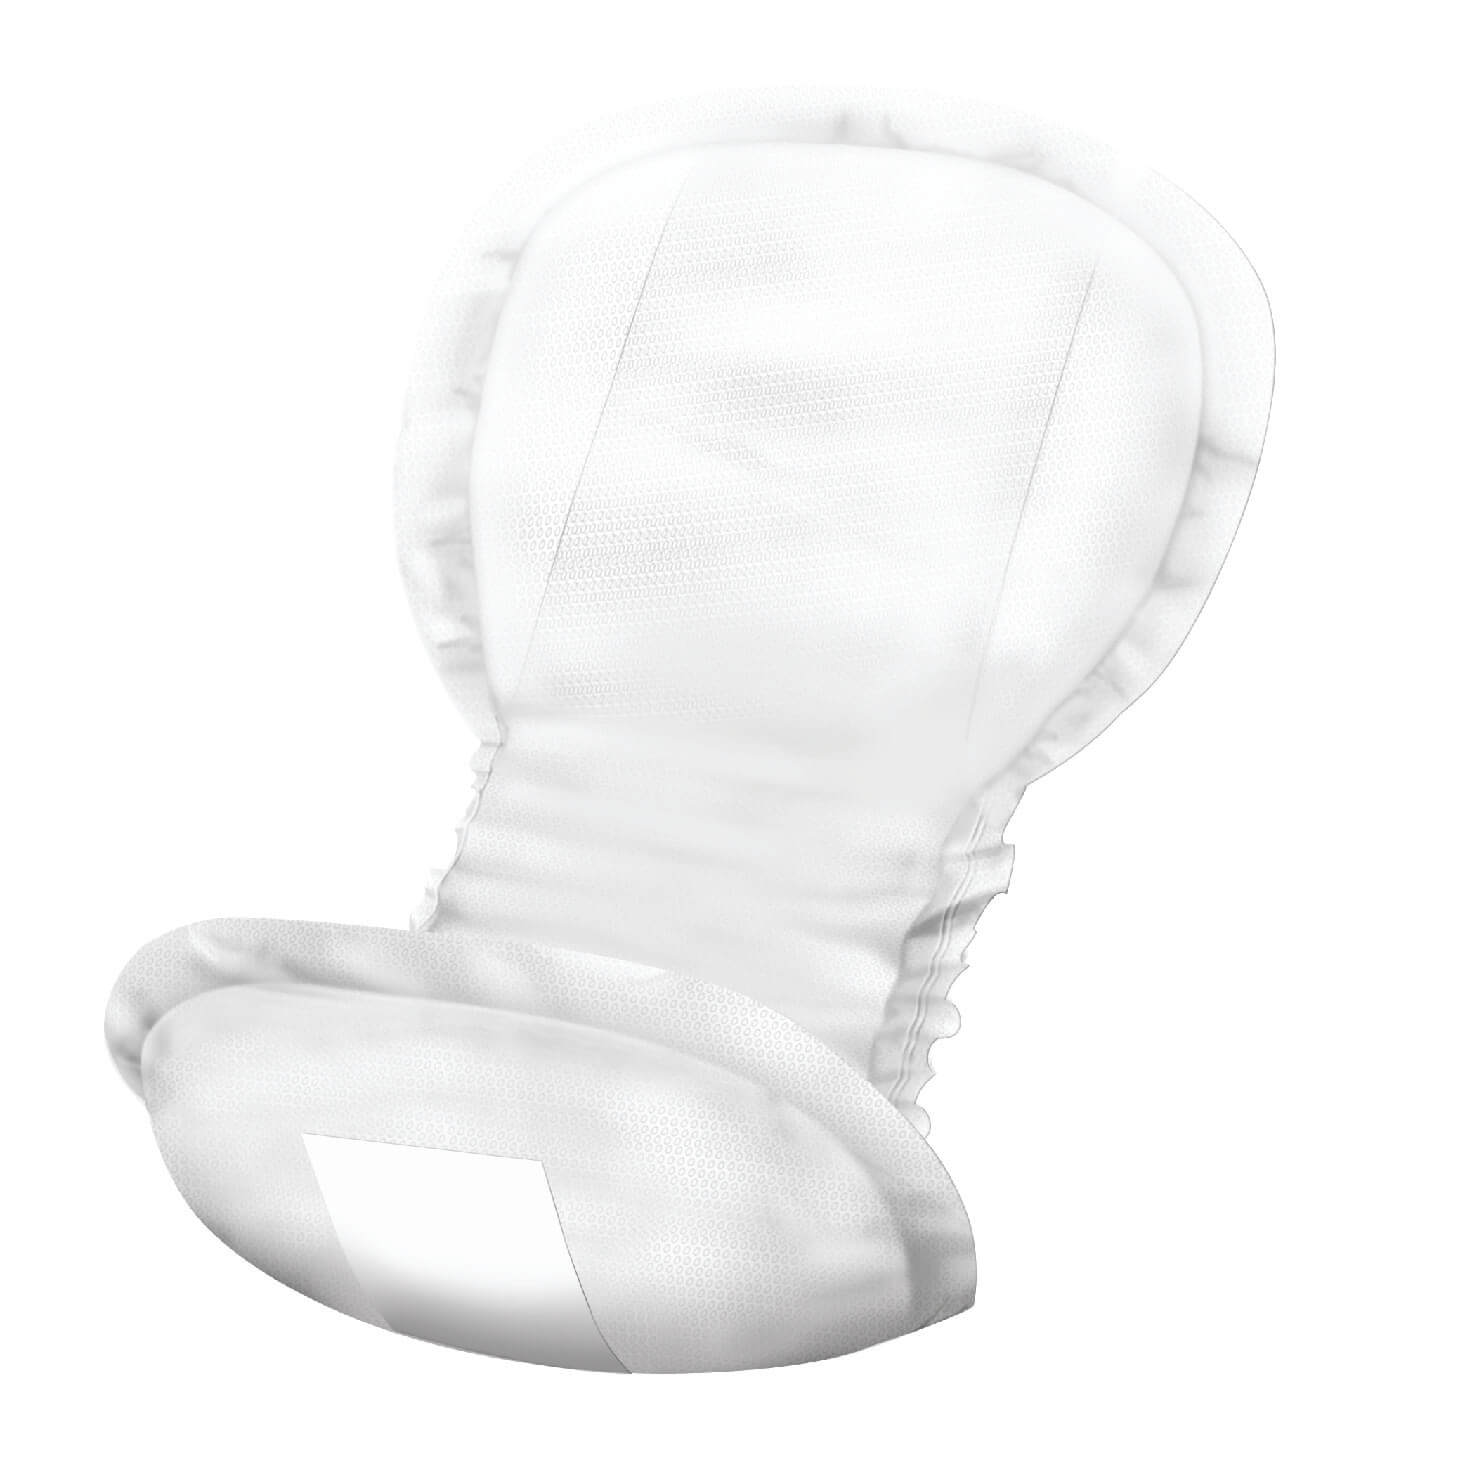 The best maternity pads 2023 - benefits of maternity pads